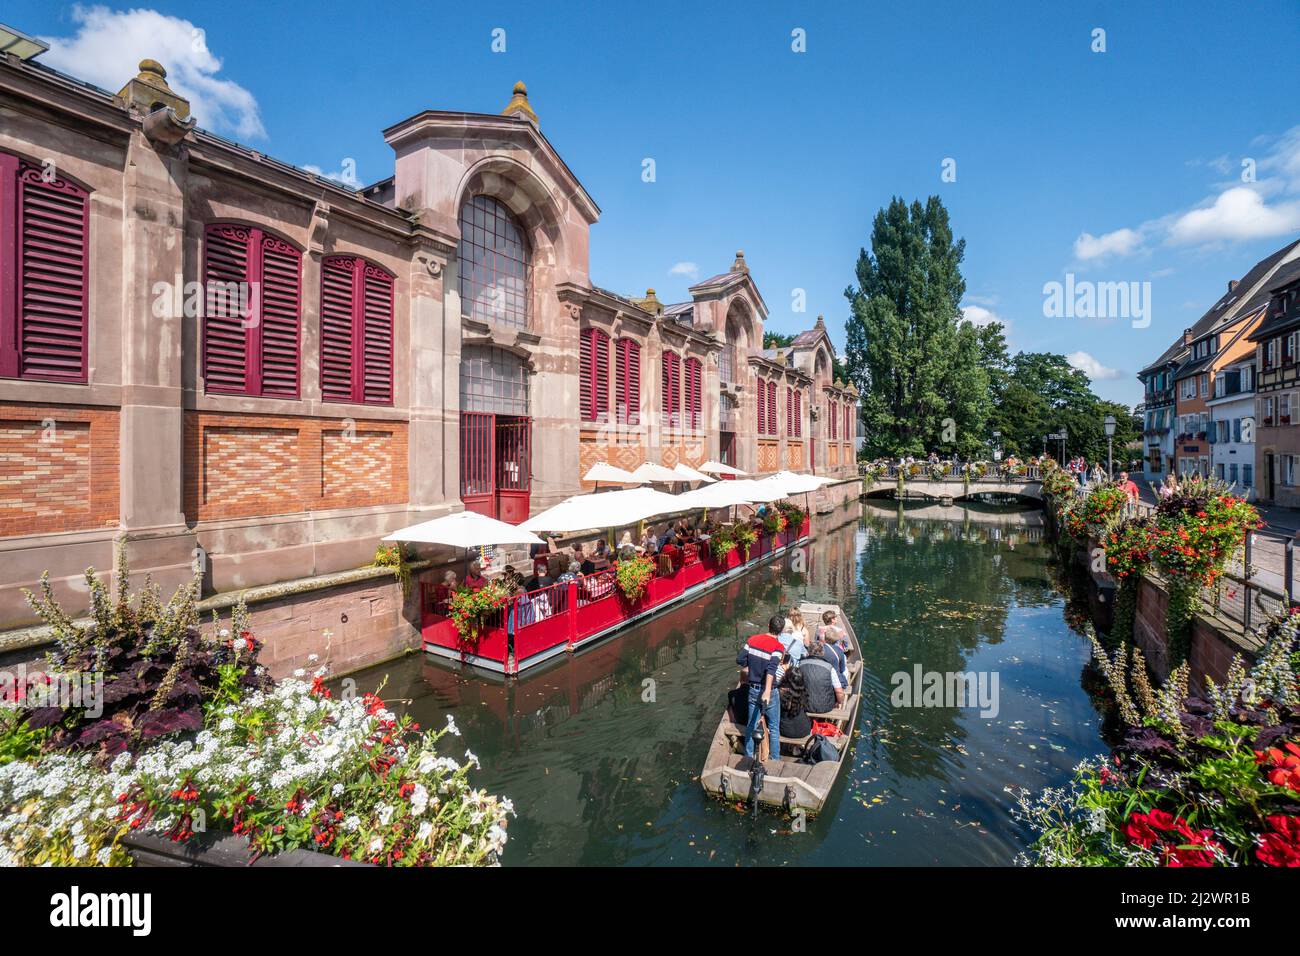 Market hall in Little Venice, wooden boat with tourists, canal, Colmar, Alsace, France, Europe Stock Photo